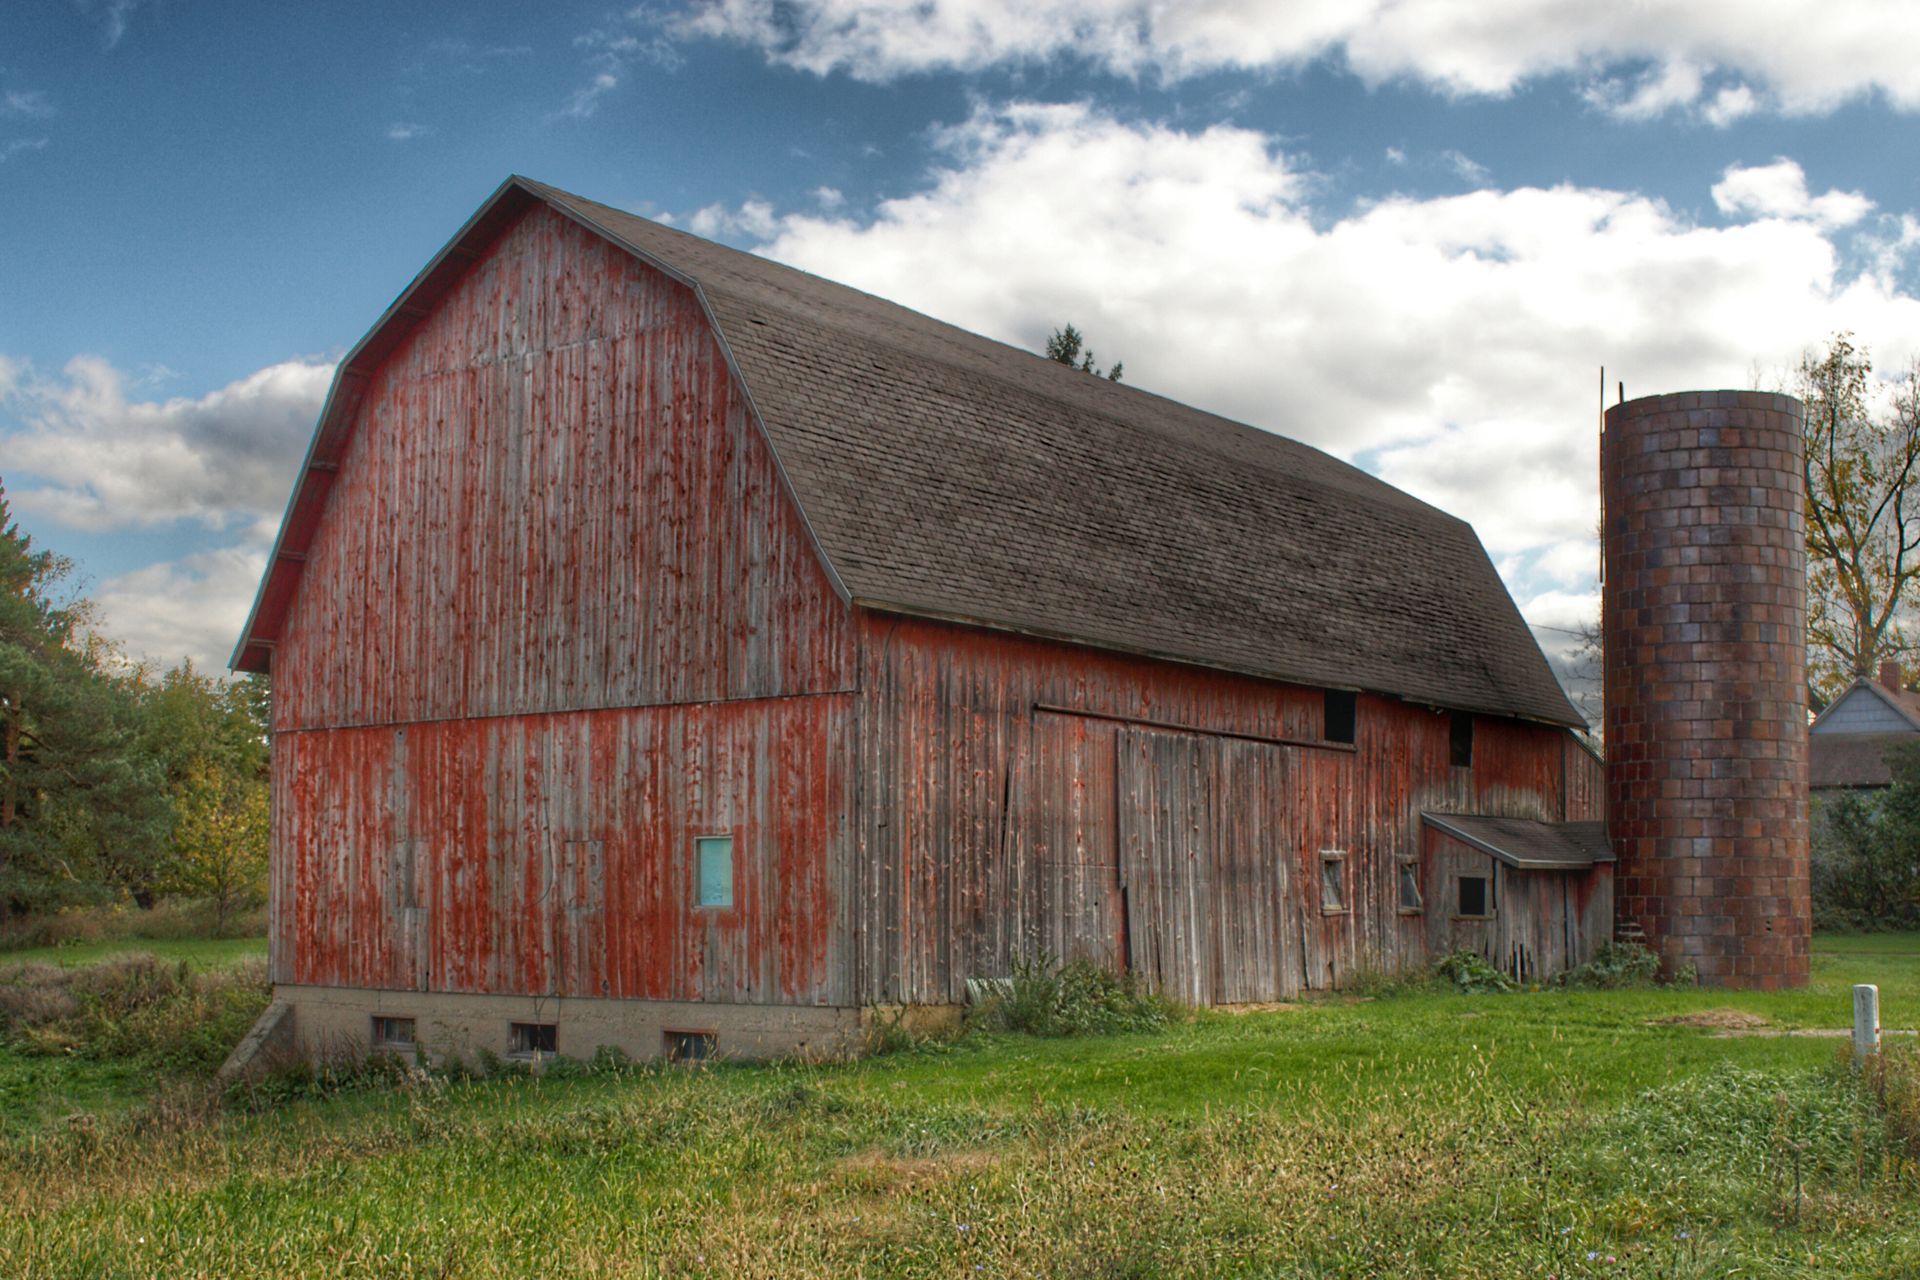 A red barn with a silo in the background is sitting in the middle of a grassy field.